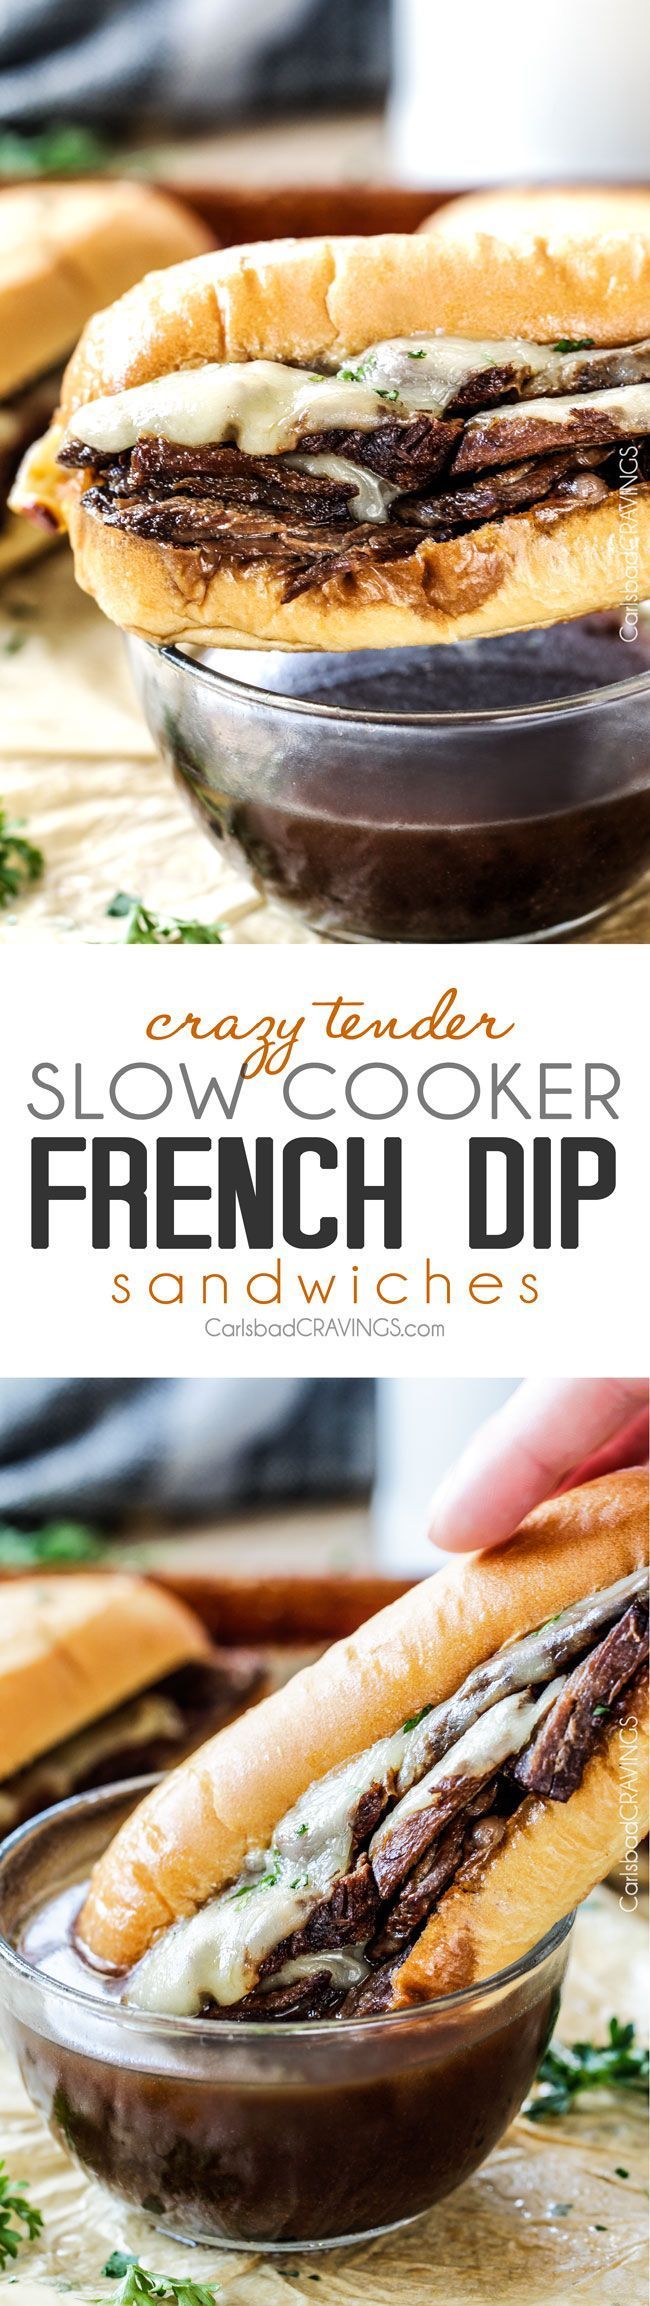 5 minute prep Crazy tender Slow Cooker French Dip Sandwiches seeping with spices are unbelievably delicious and make the easiest